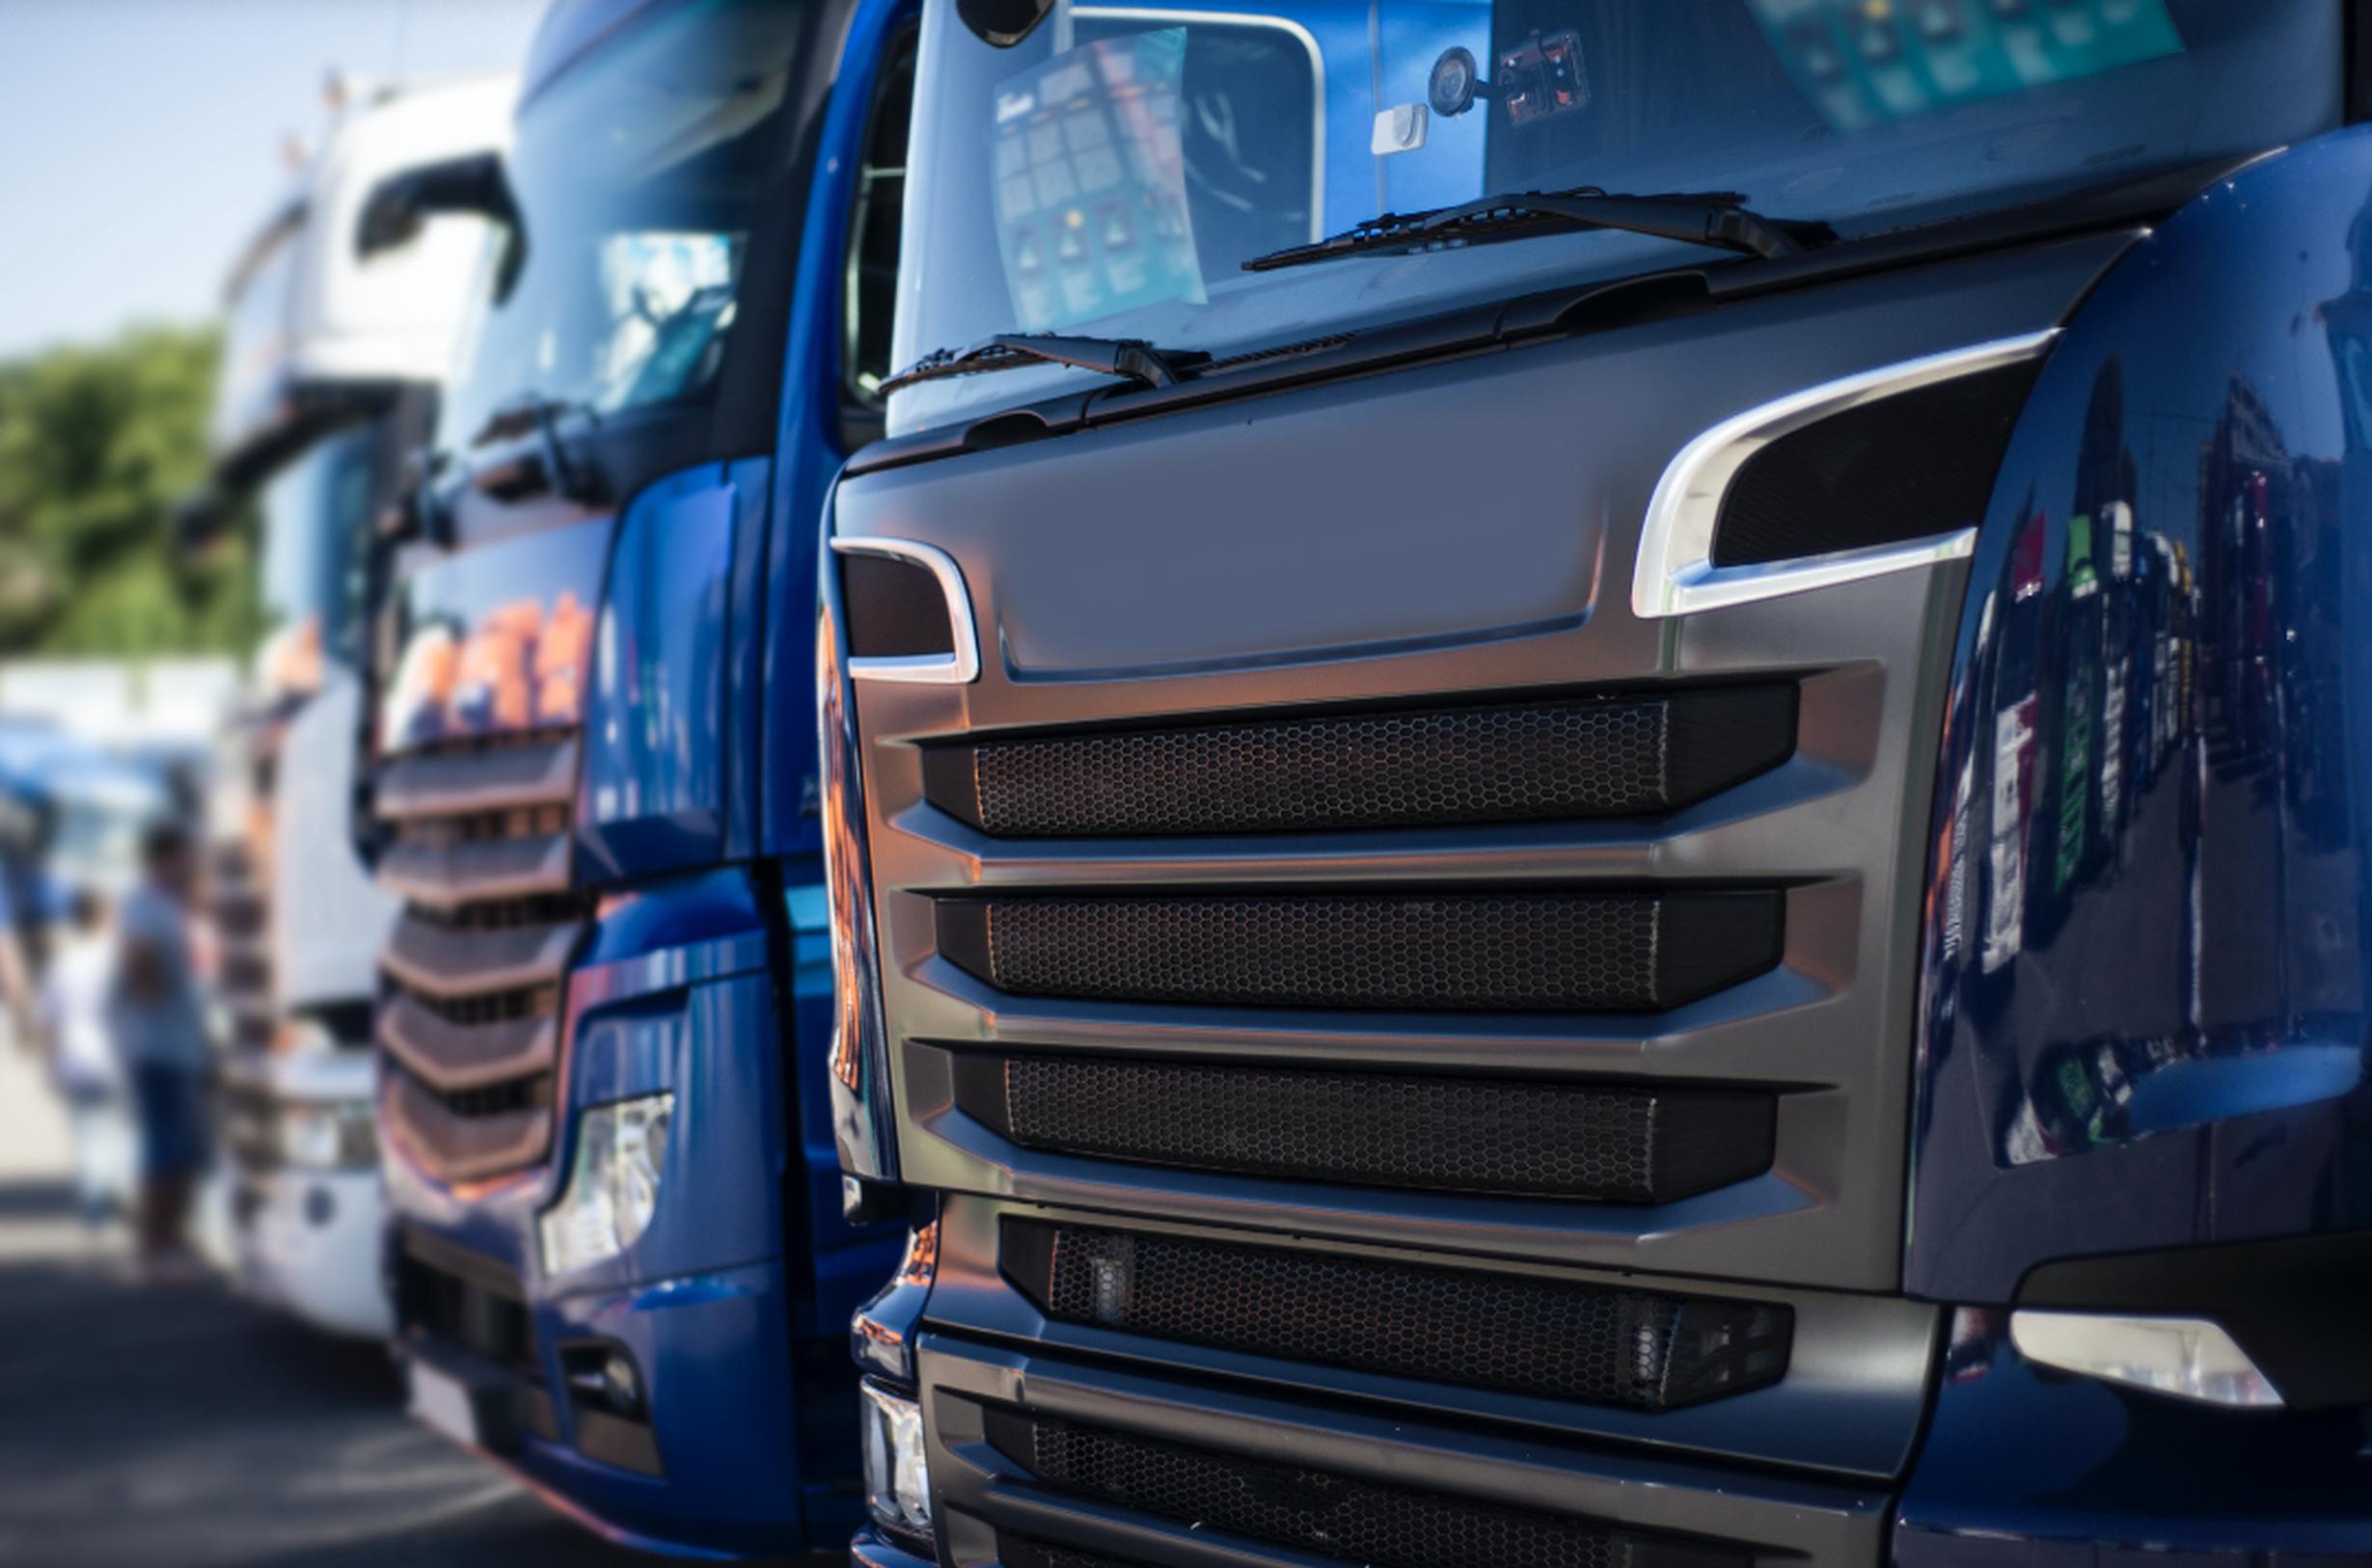 Industry estimates place there is a current shortfall of around 100,000 HGV drivers in the UK